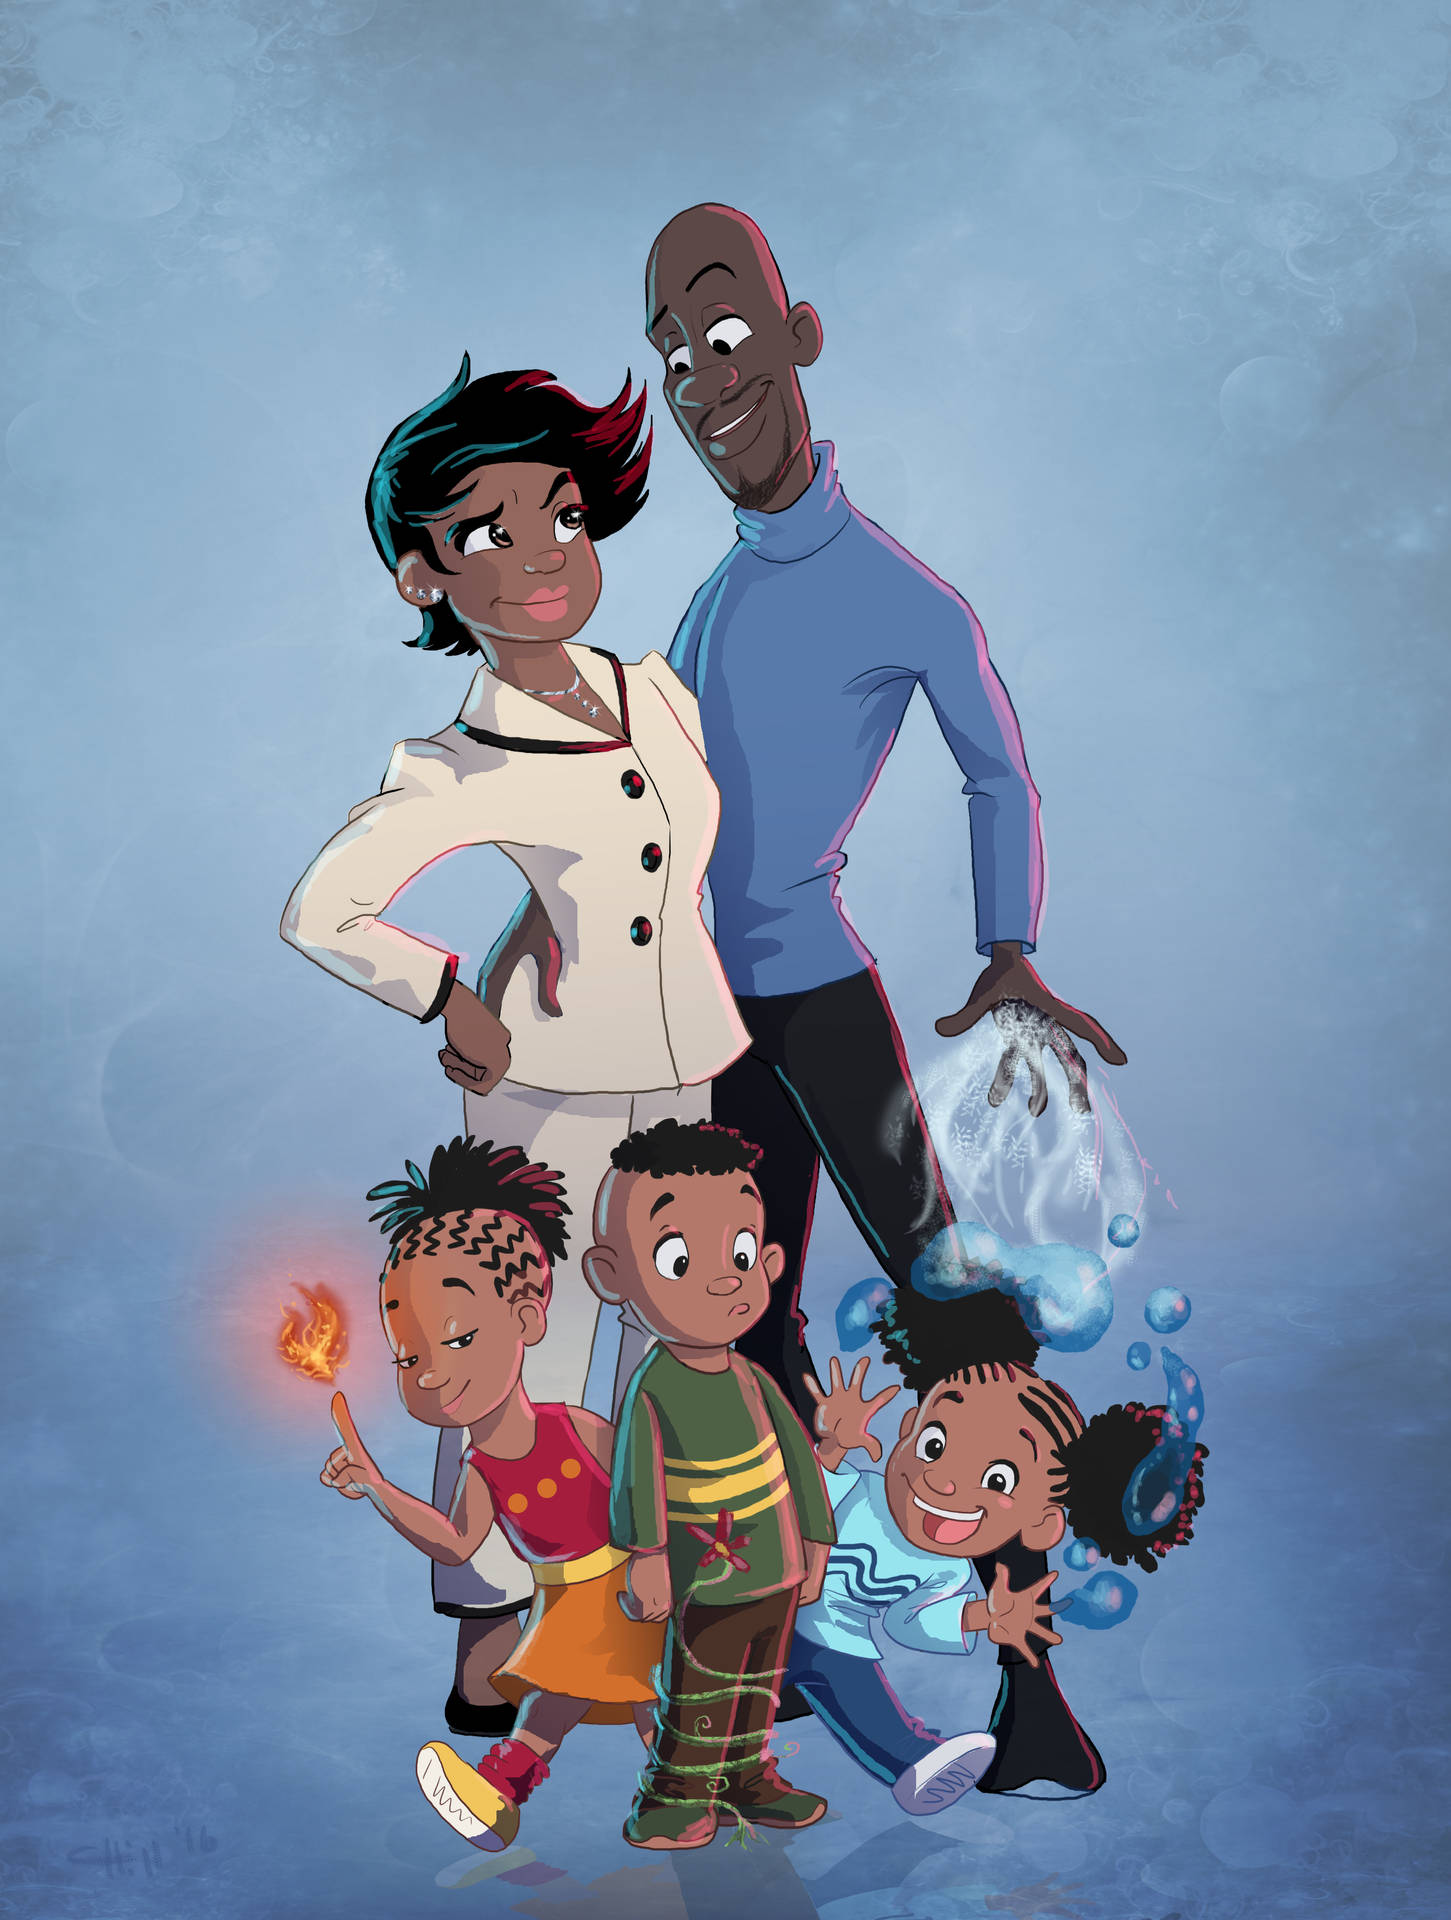 Frozone with his family in an animated movie scene Wallpaper